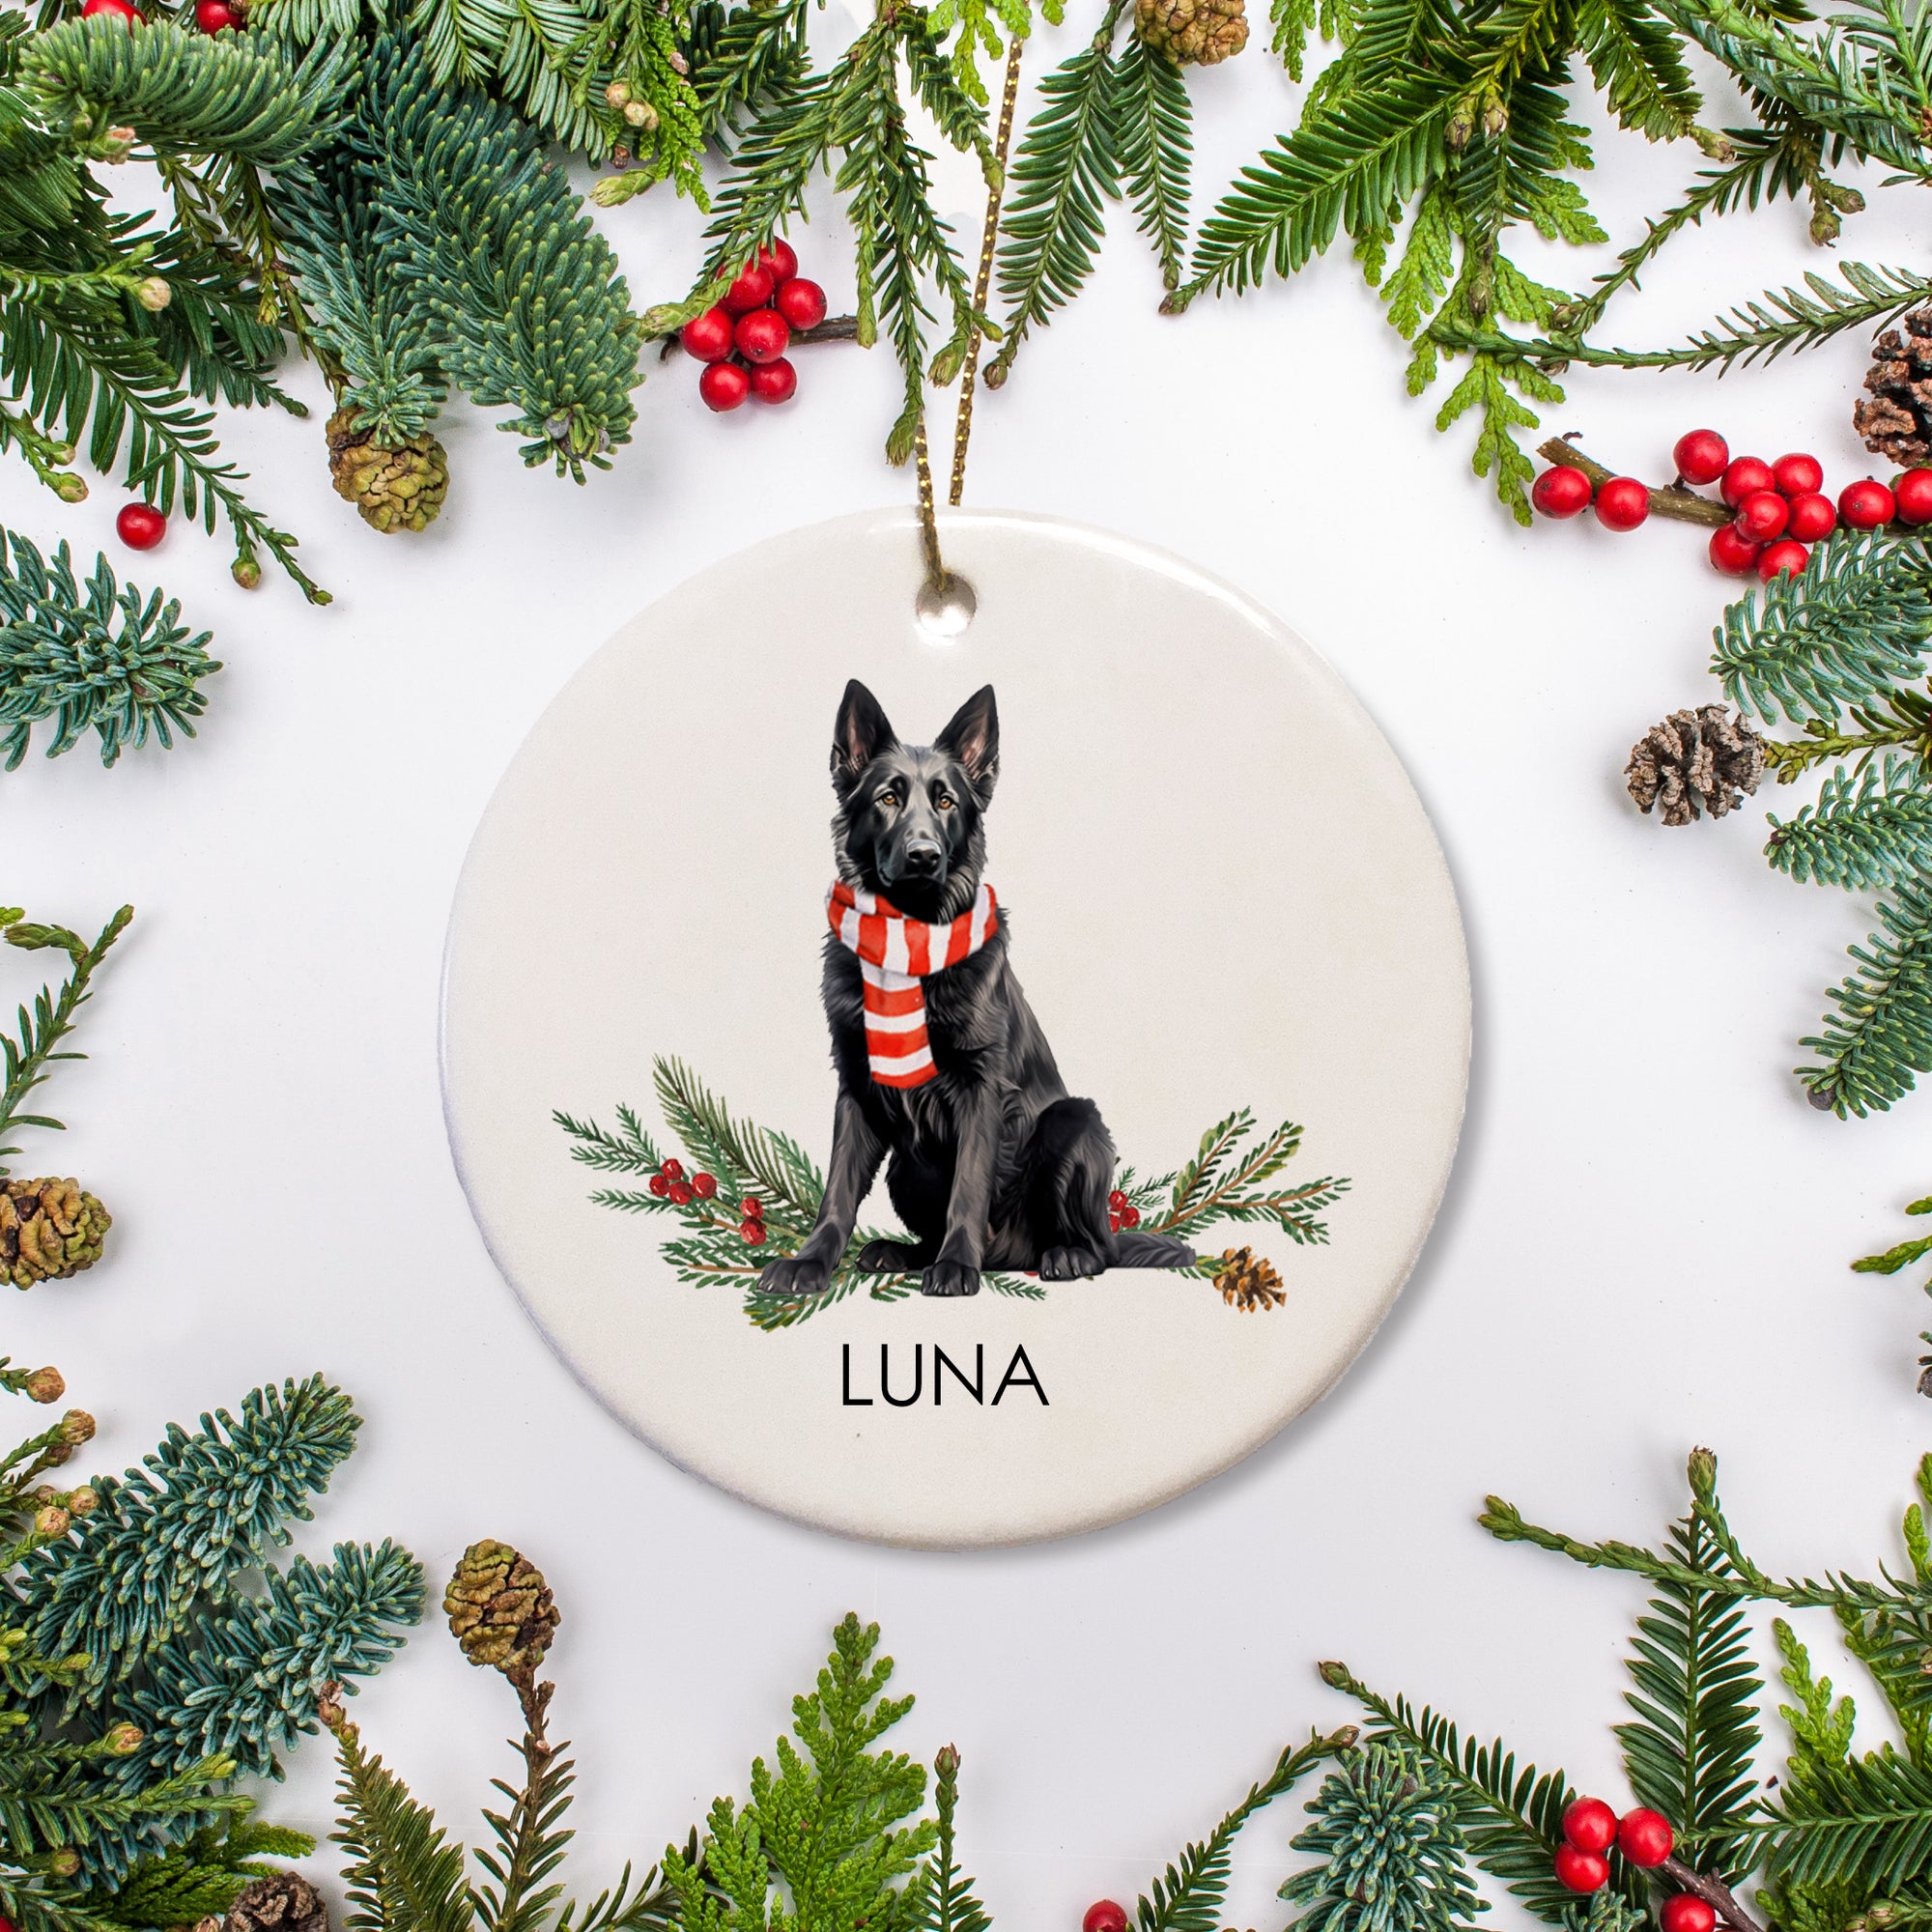 This Christmas ornament shows a black German Shepherd on a bed of holly, and is personalized with your dog's name. It's an ideal gift for any pet lover or a thoughtful way to remember their puppy's first holiday season.